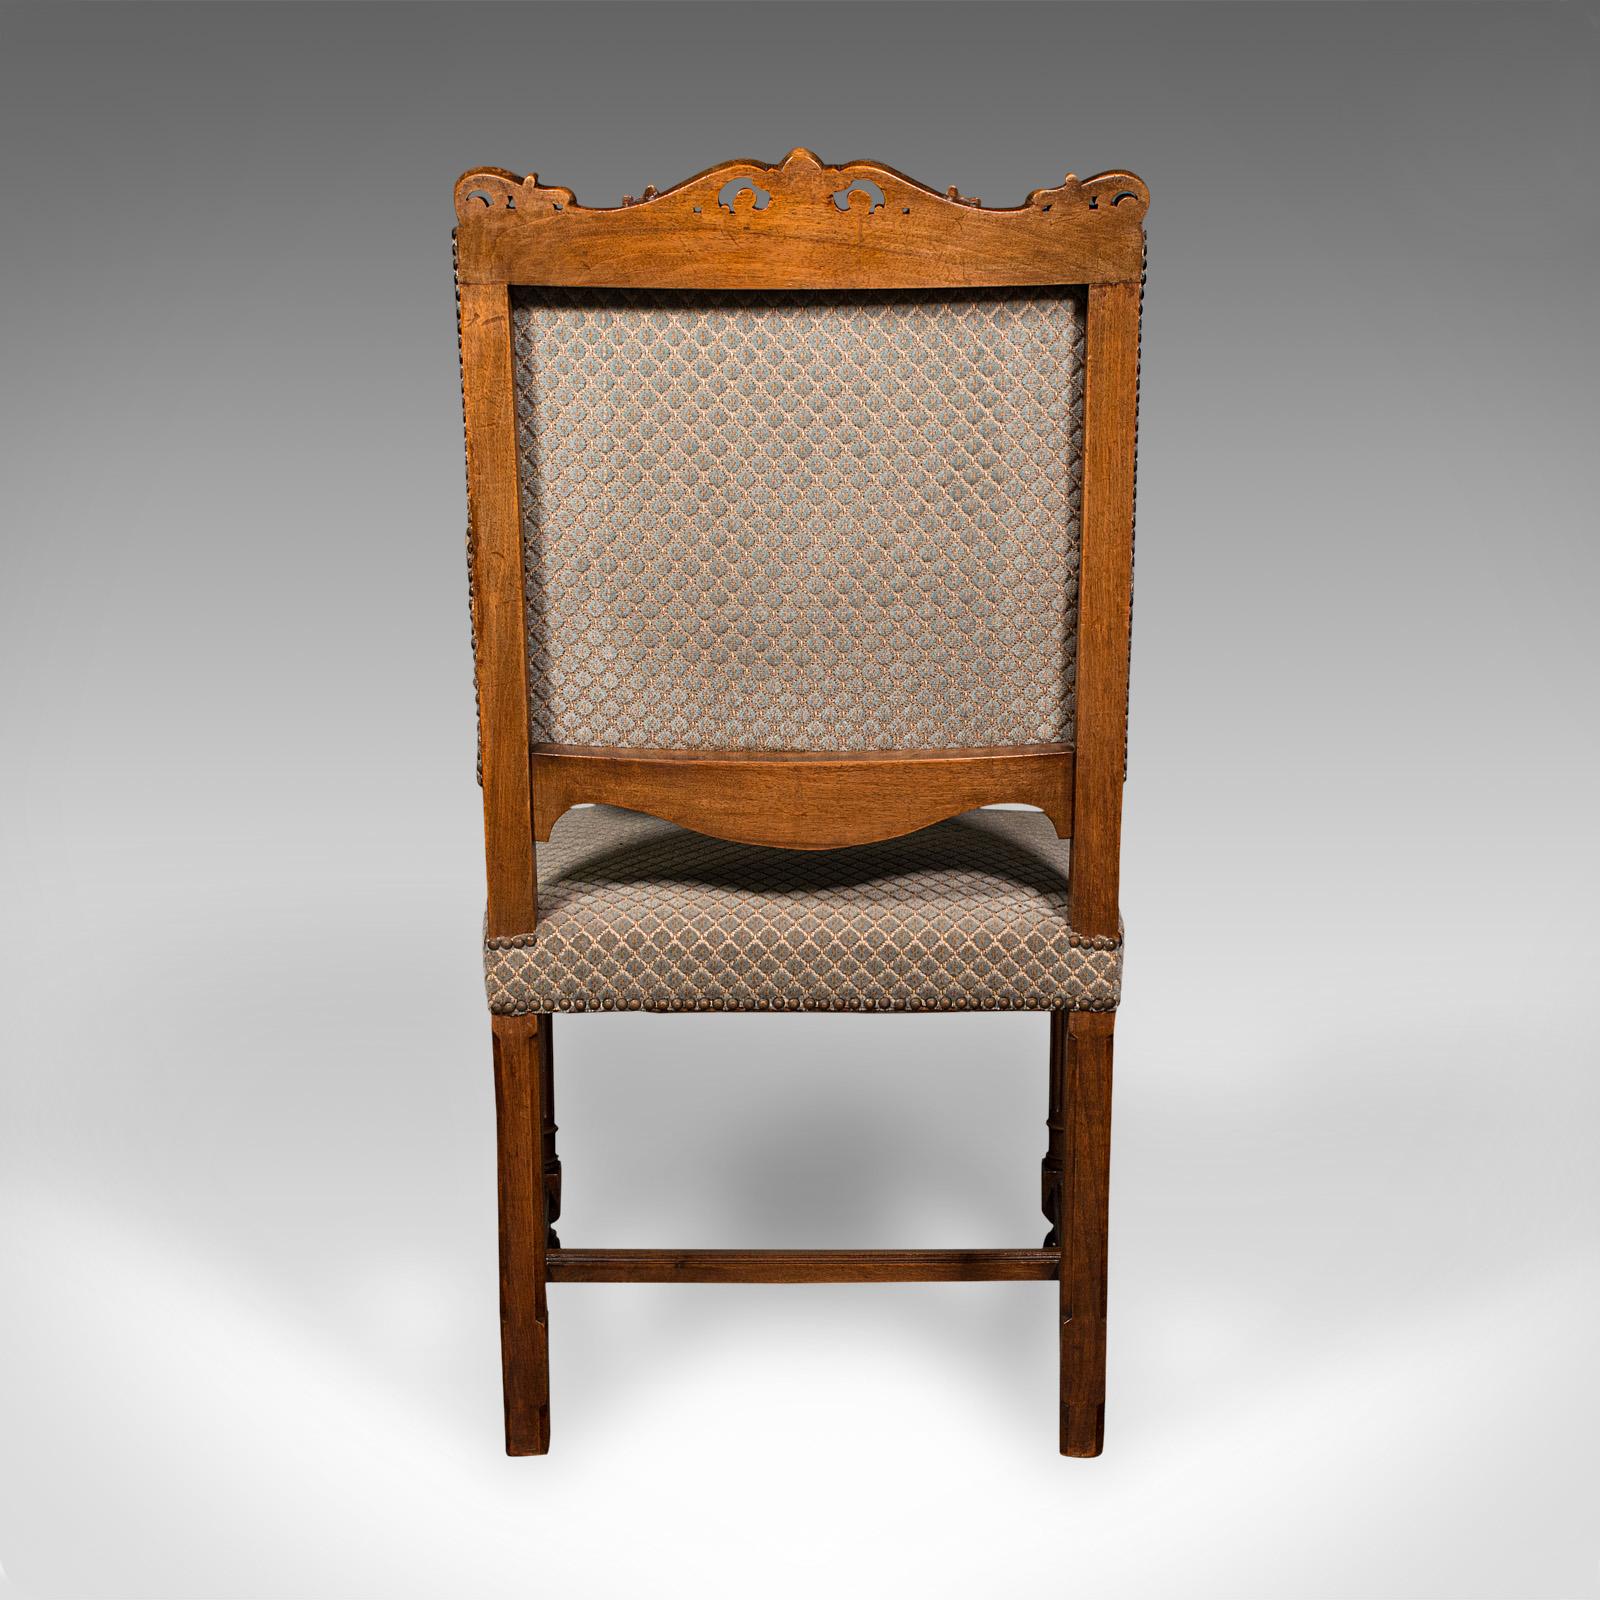 British Set of 8 Antique Dining Chairs, English, Walnut, Carver, Seat, Edwardian, c.1910 For Sale